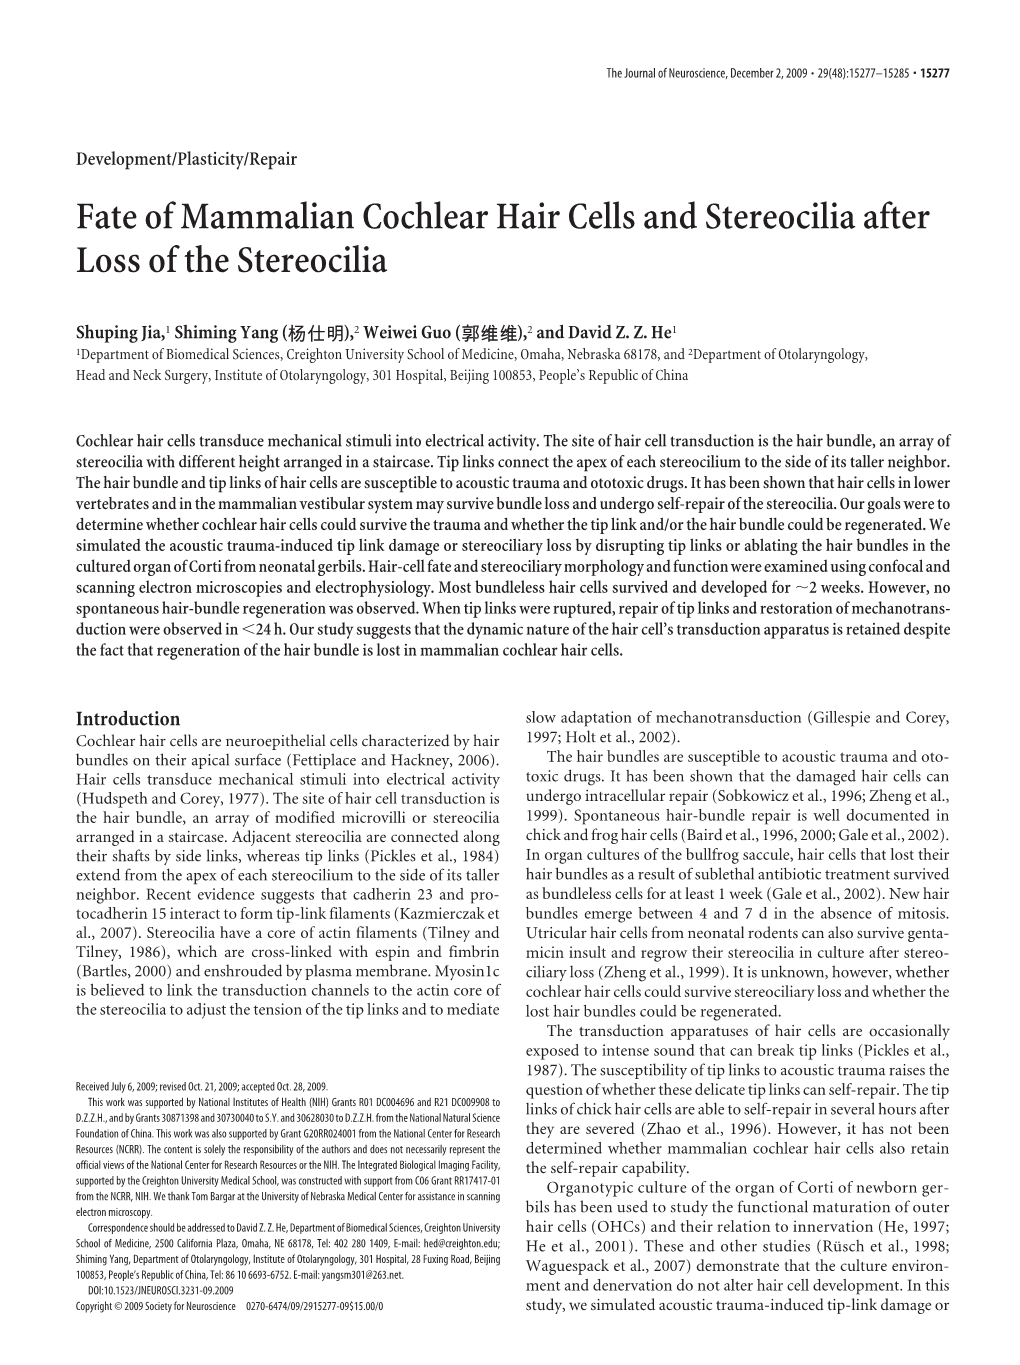 Fate of Mammalian Cochlear Hair Cells and Stereocilia After Loss of the Stereocilia